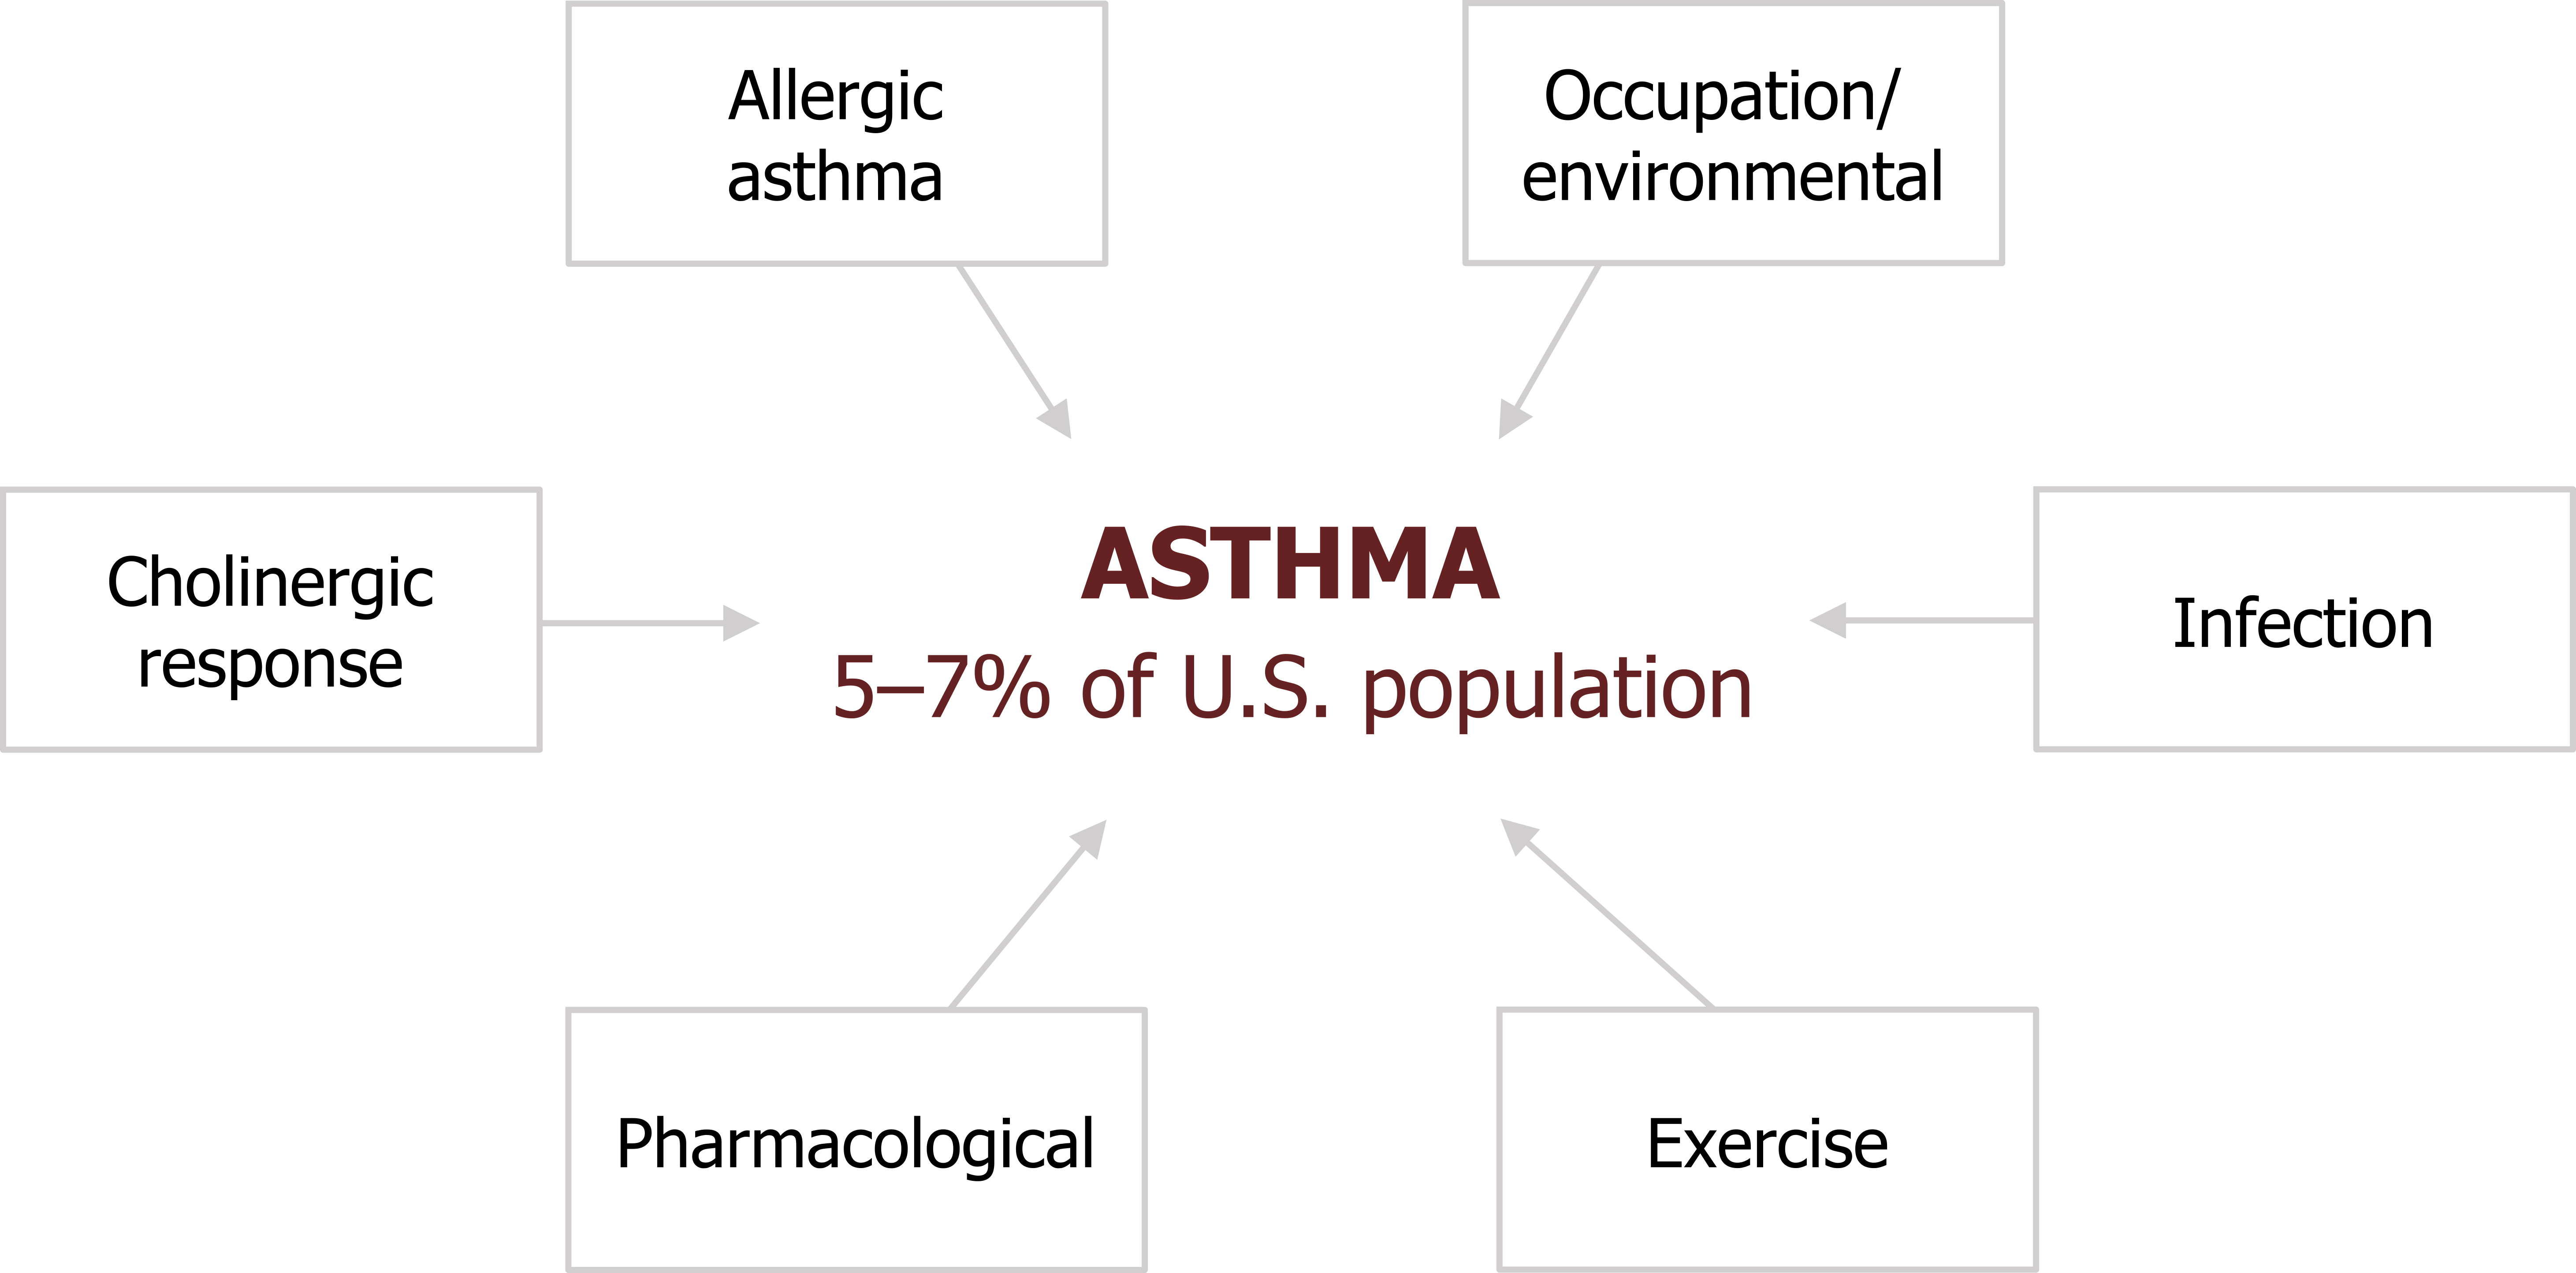 Center circle states: Asthma 5-7% of US population. Multiple rectangles with arrows pointing towards the circle stating allergic asthma, cholinergic response, pharmacological, occupation/environmental, infection, and exercise